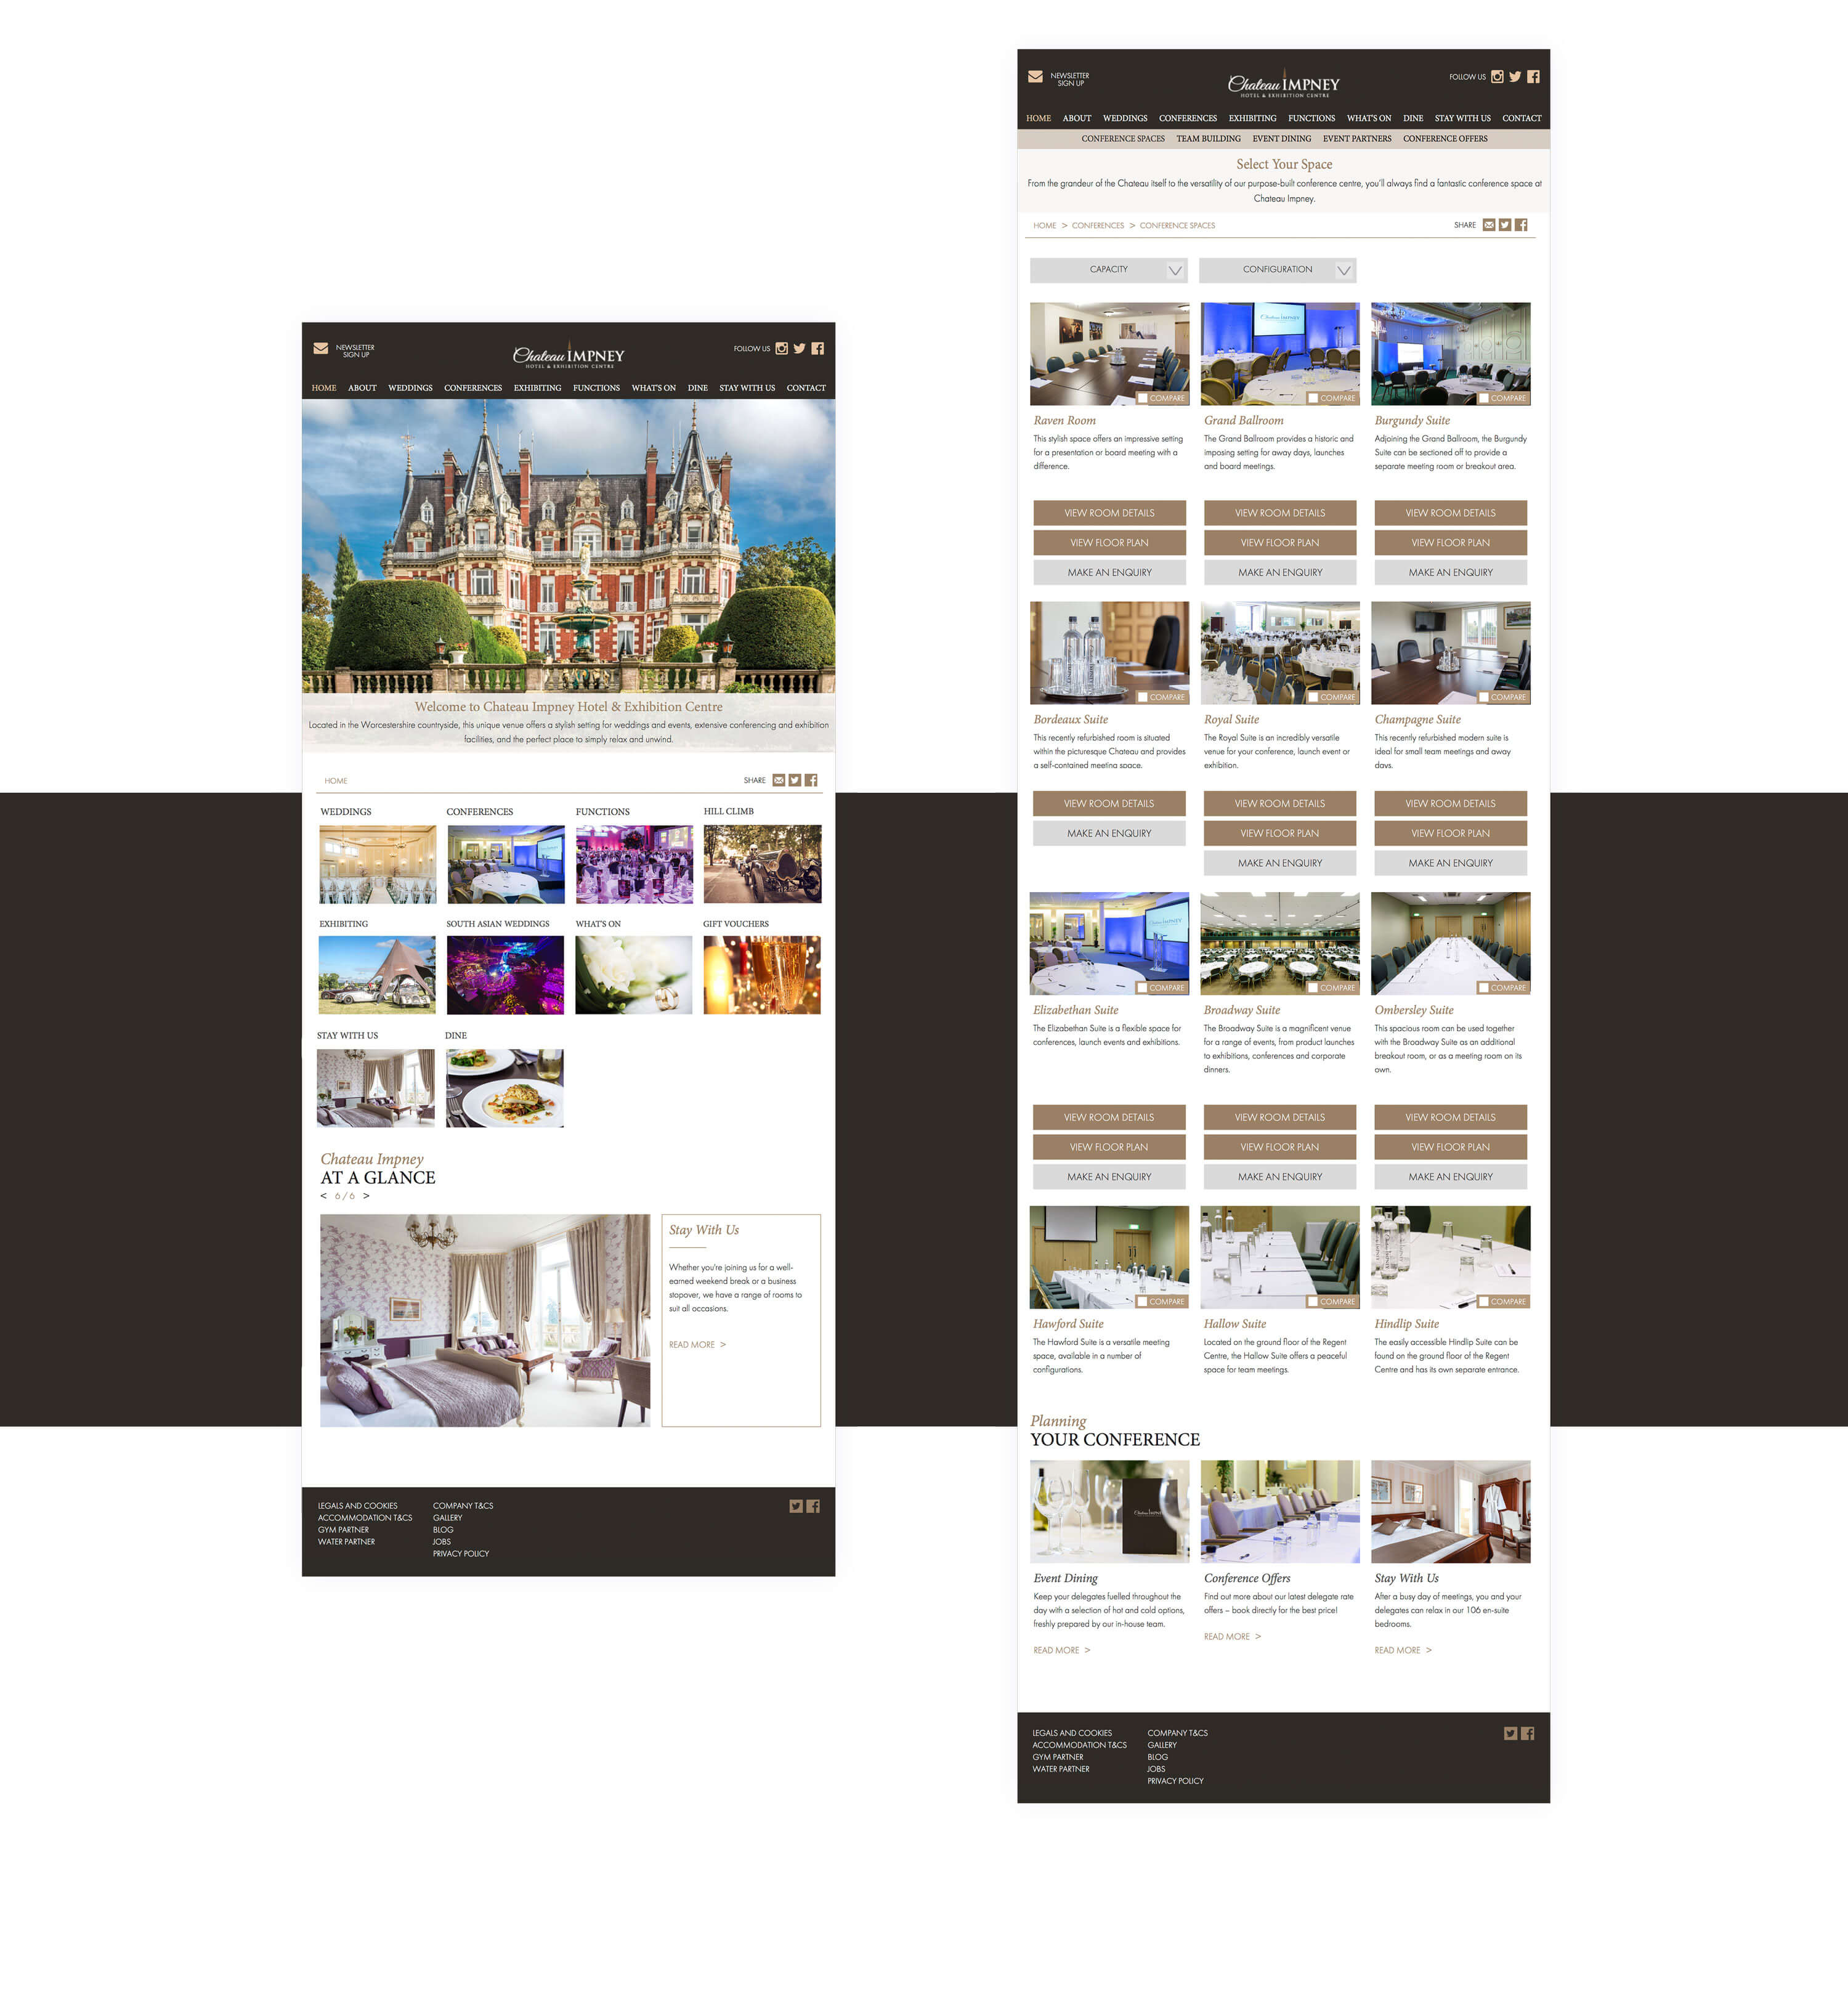 Website design for Chateau Impney by Mighty, hotel marketing agency Worcester